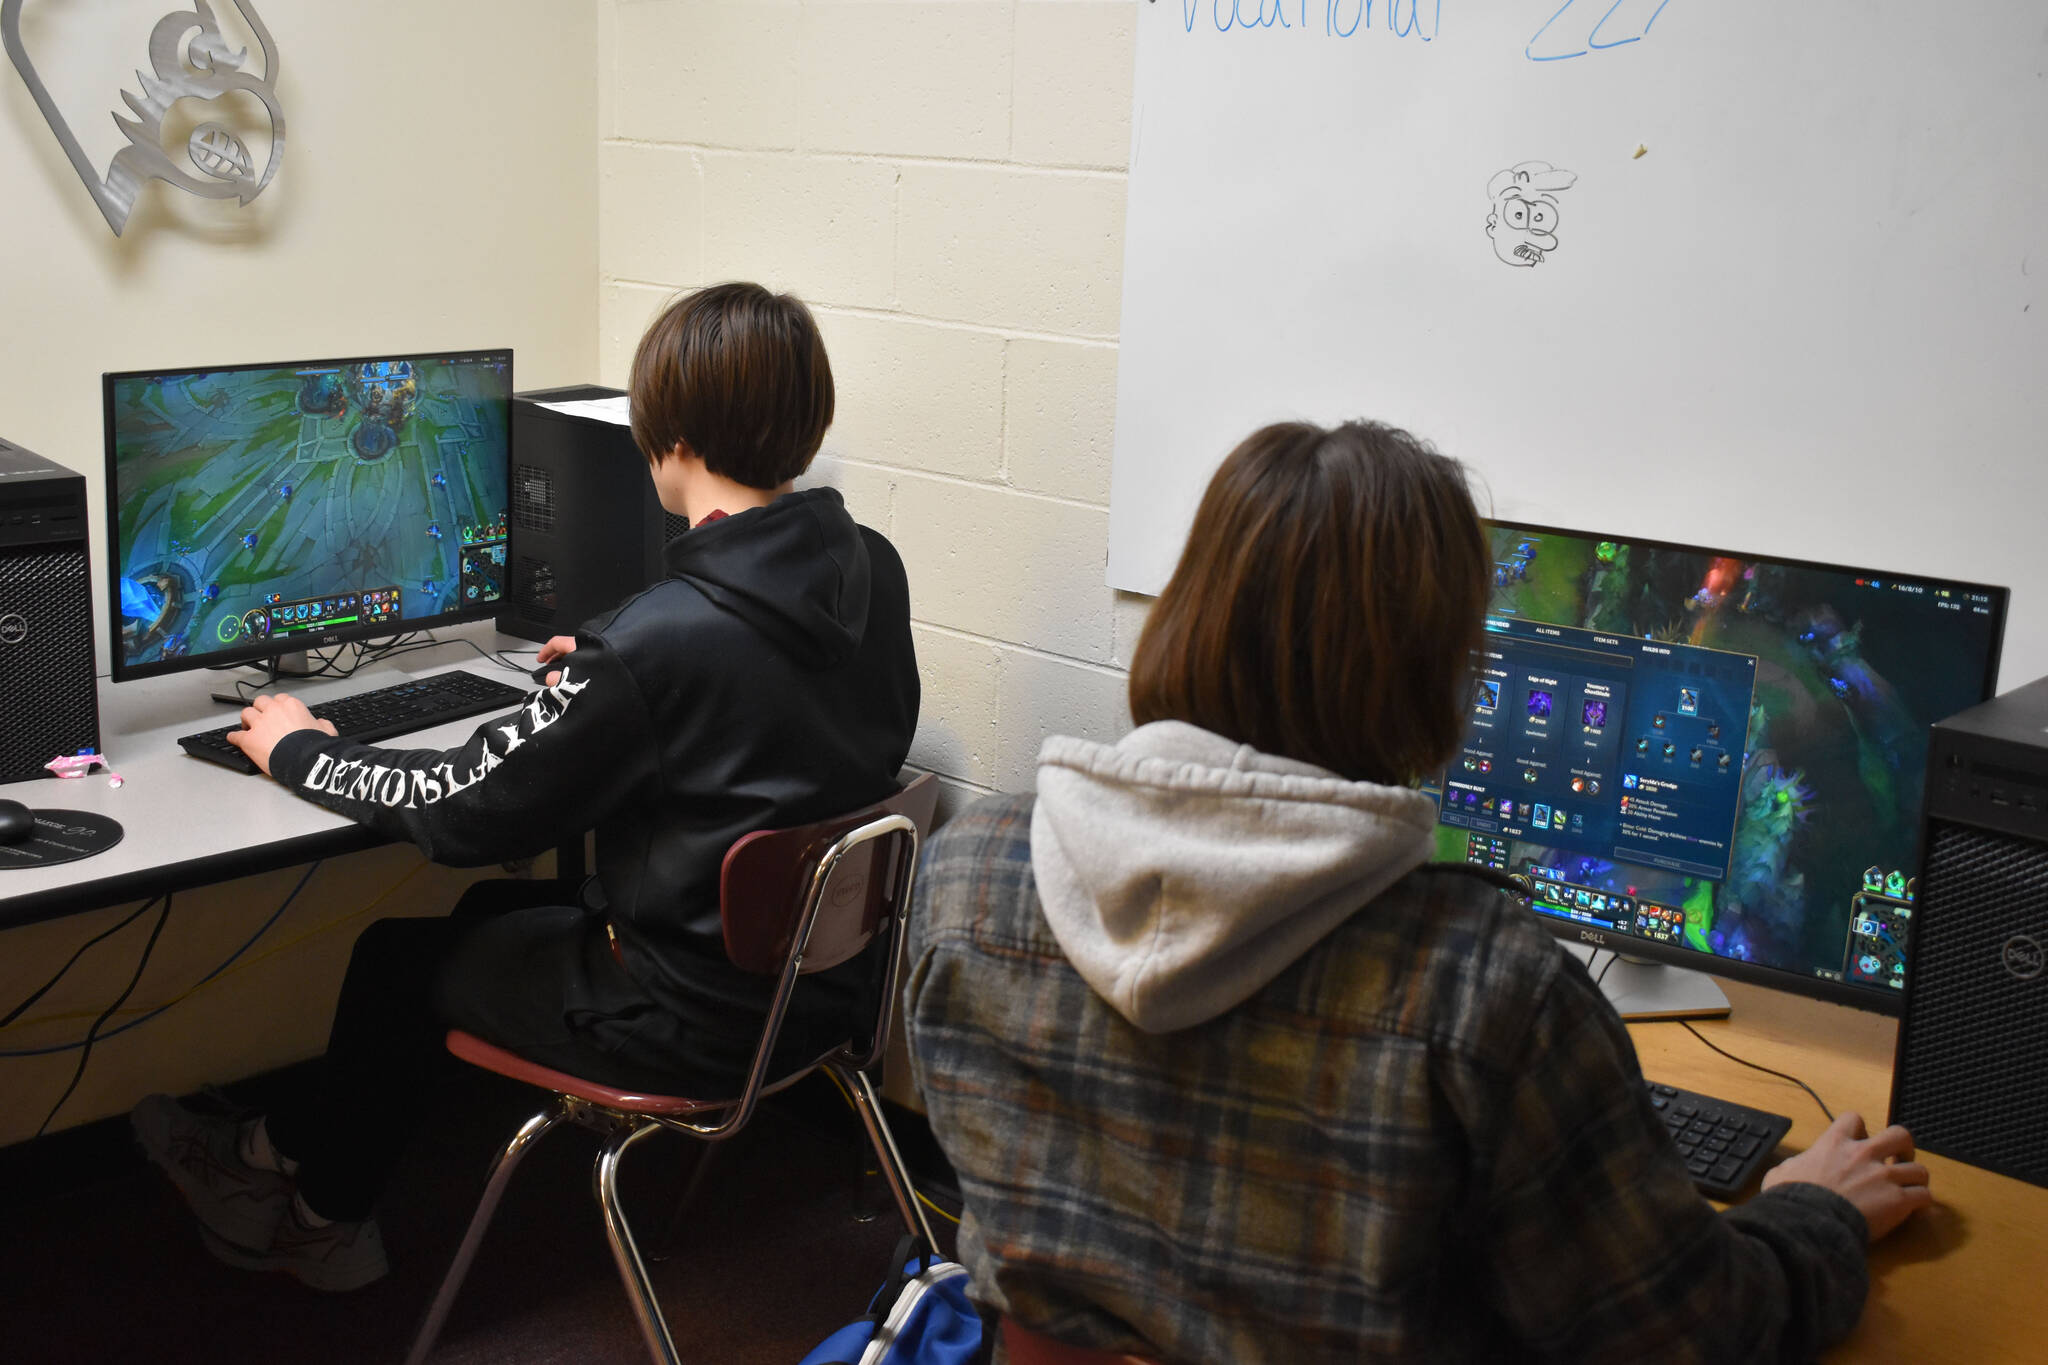 Jackson Anding and Cody Good participate in a practice League of Legends match on Tuesday, Nov. 22, 2022 at Kenai Central High School in Kenai, Alaska. (Jake Dye/Peninsula Clarion)